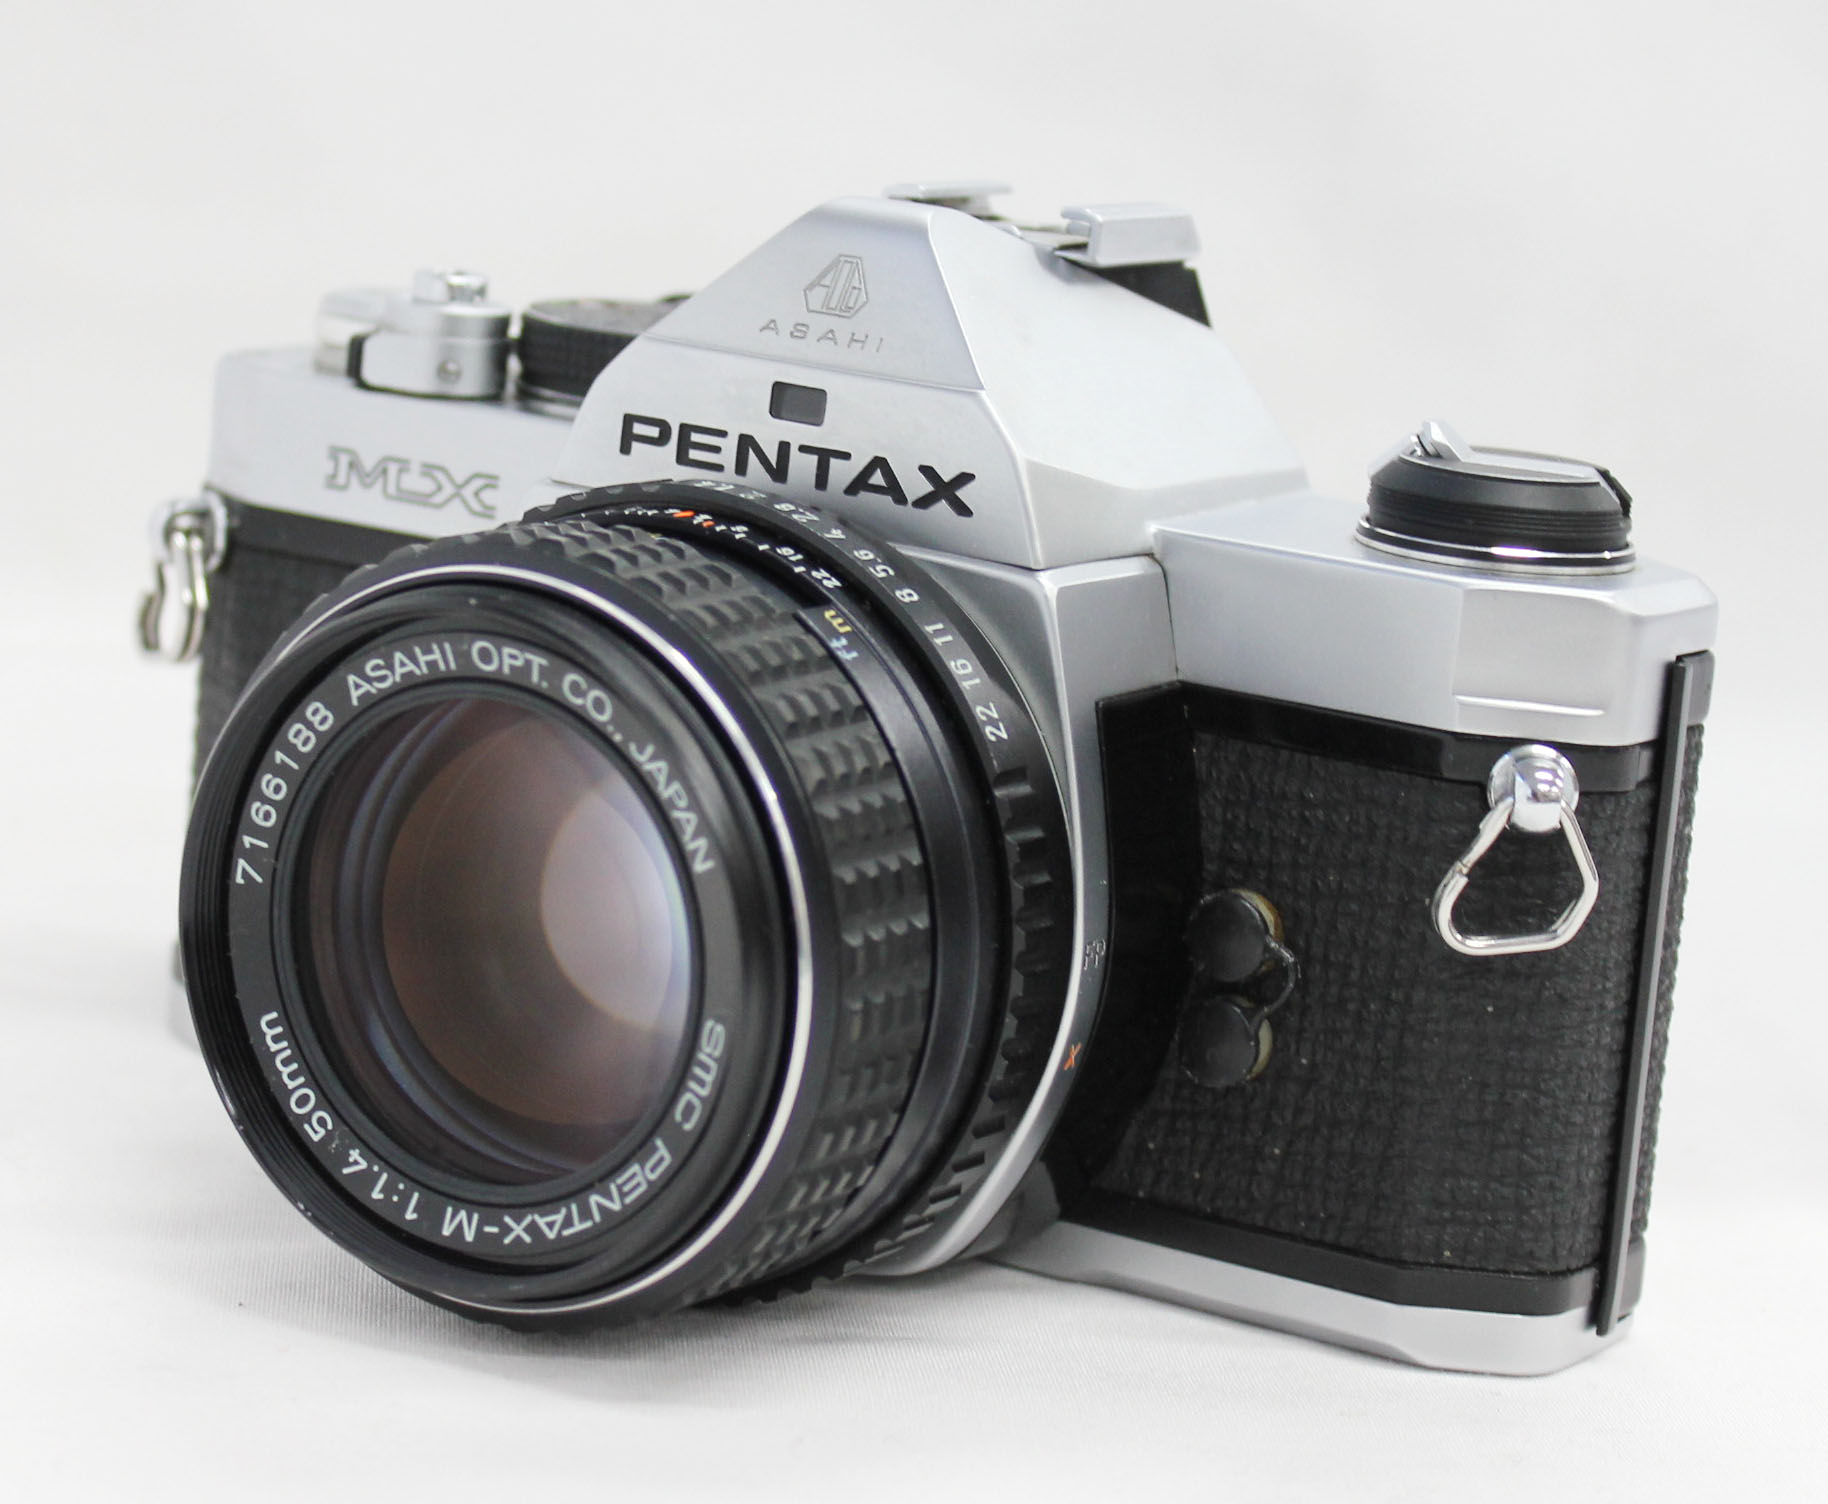 Japan Used Camera Shop | [Excellent++++] Pentax MX 35mm SLR Film Camera with SMC Pentax-M 50mm F/1.4 Lens from Japan